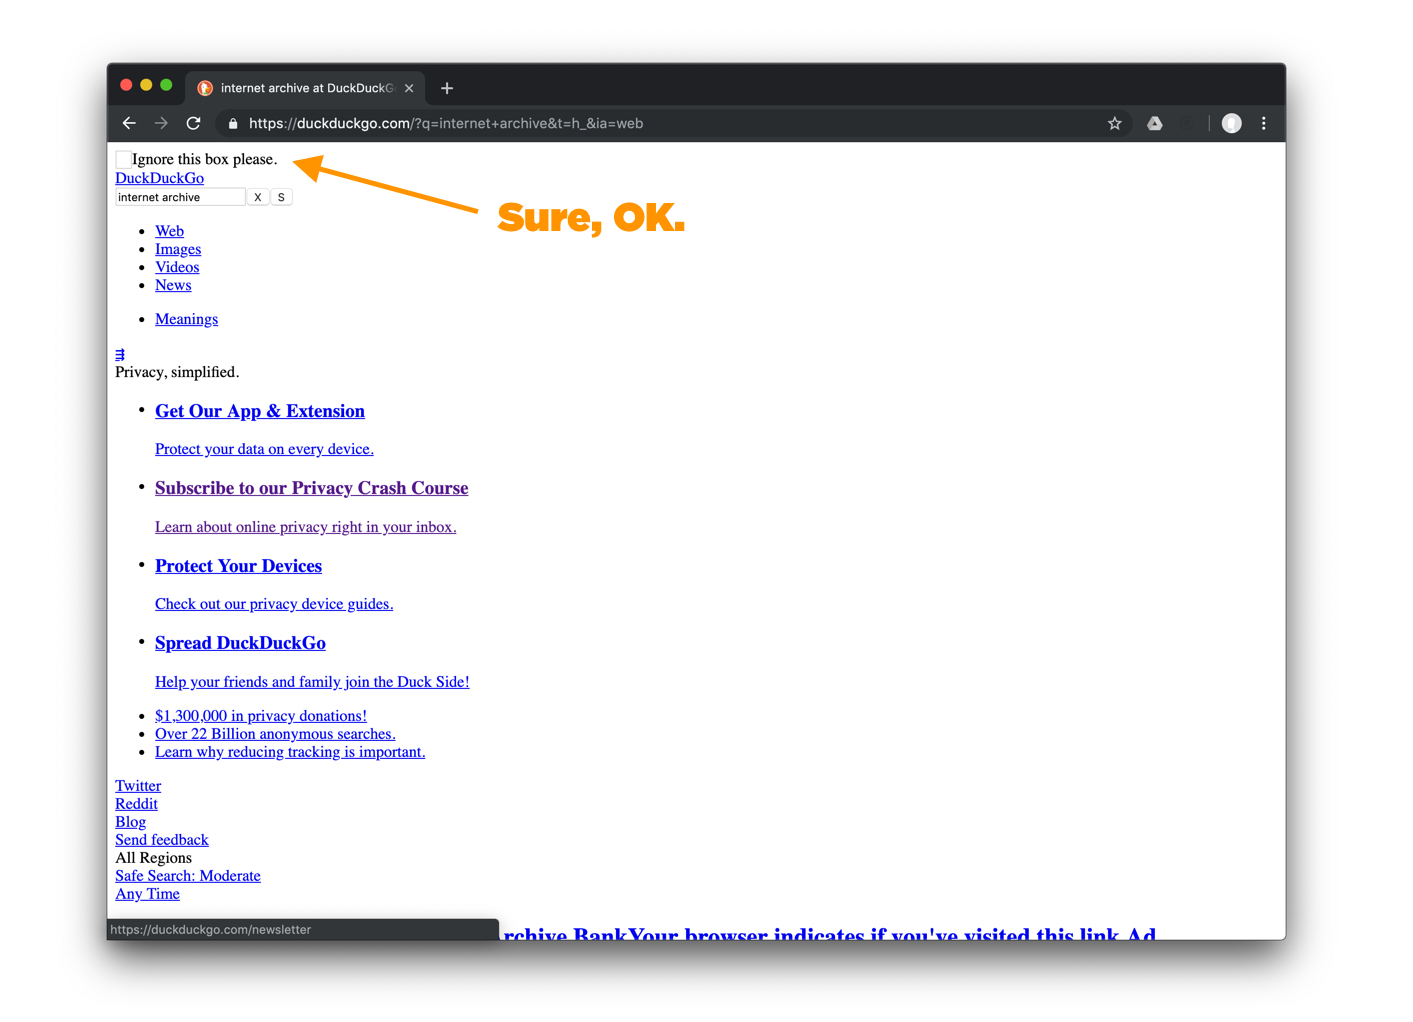 Orange arrow pointing at a tiny box on the search results page saying “Sure, OK.”